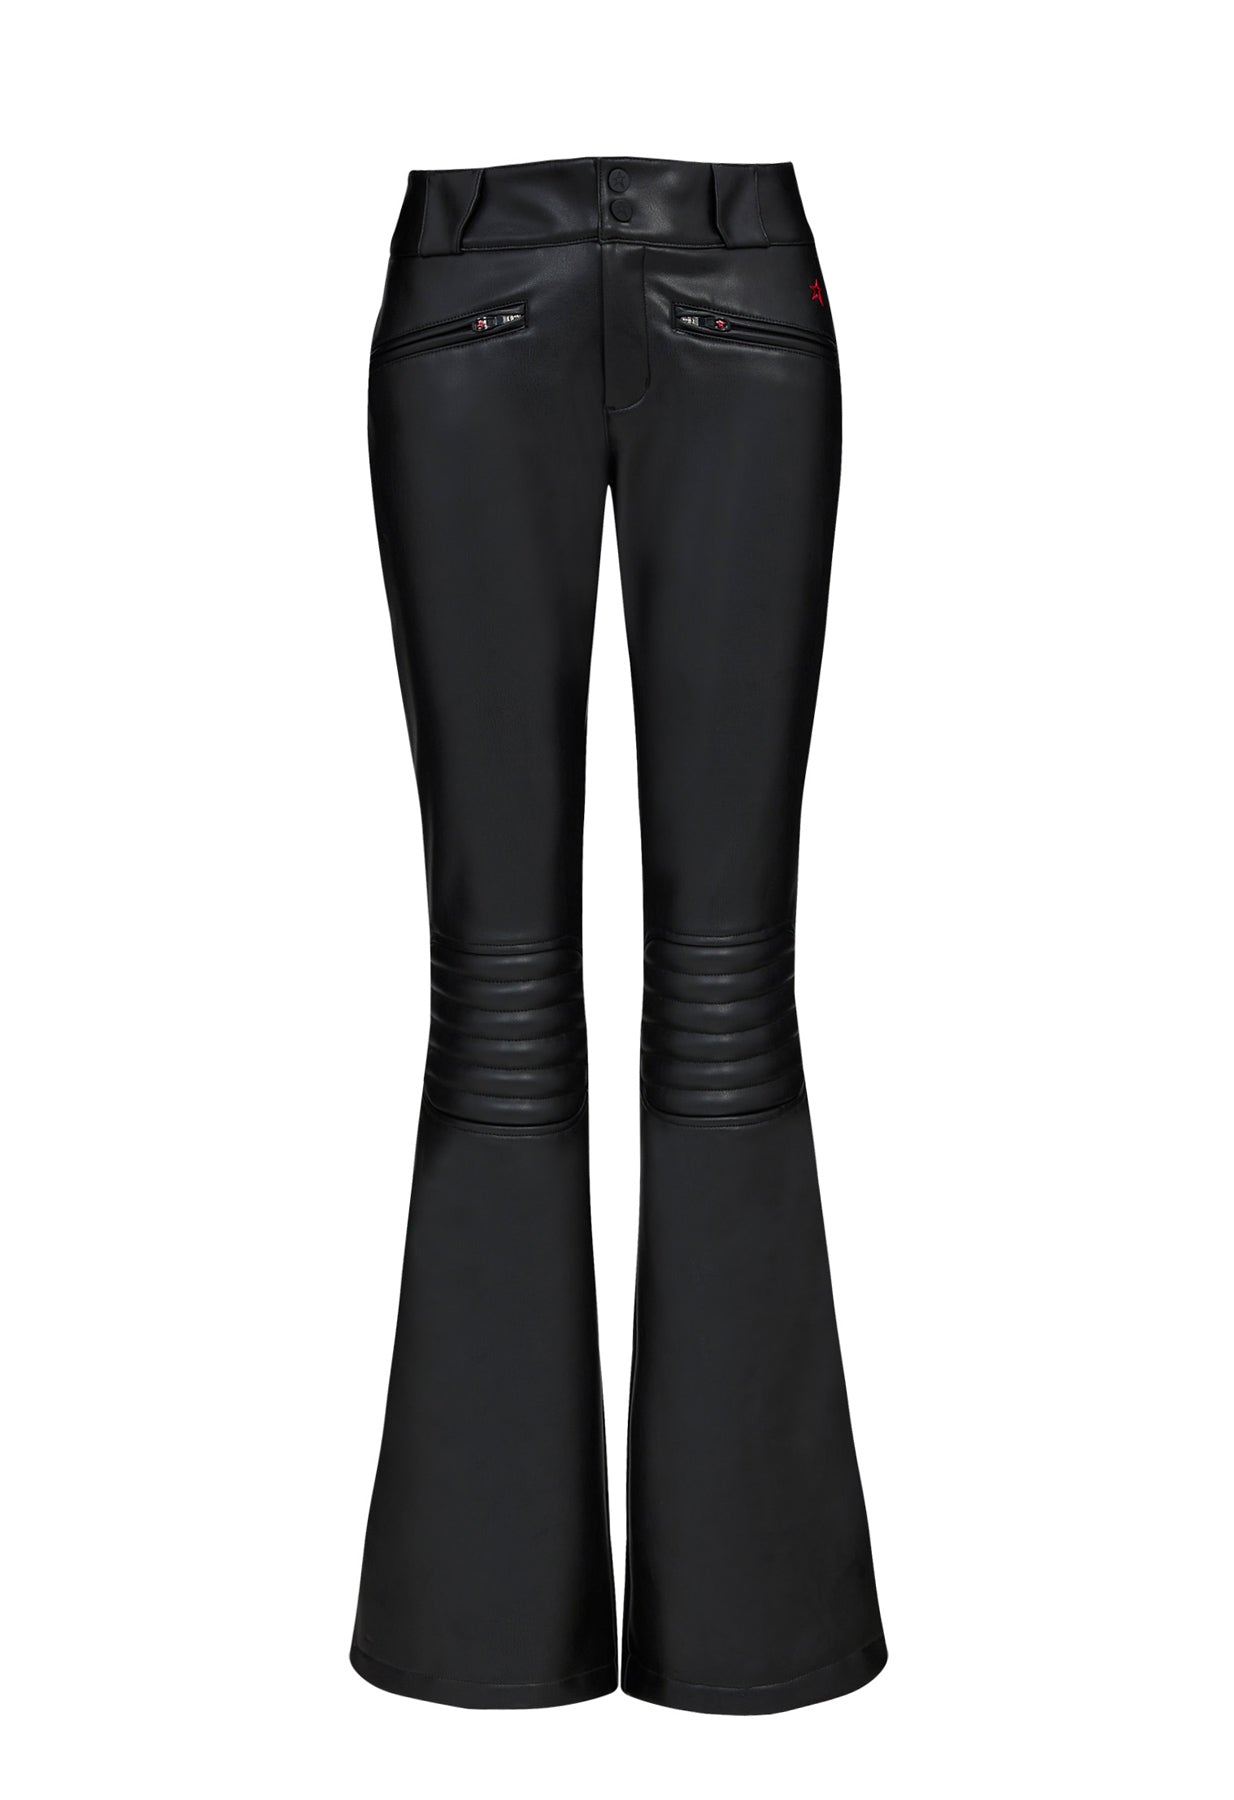 Perfect Moment Aurora Flare Race Ski Pant in Black Faux Leather